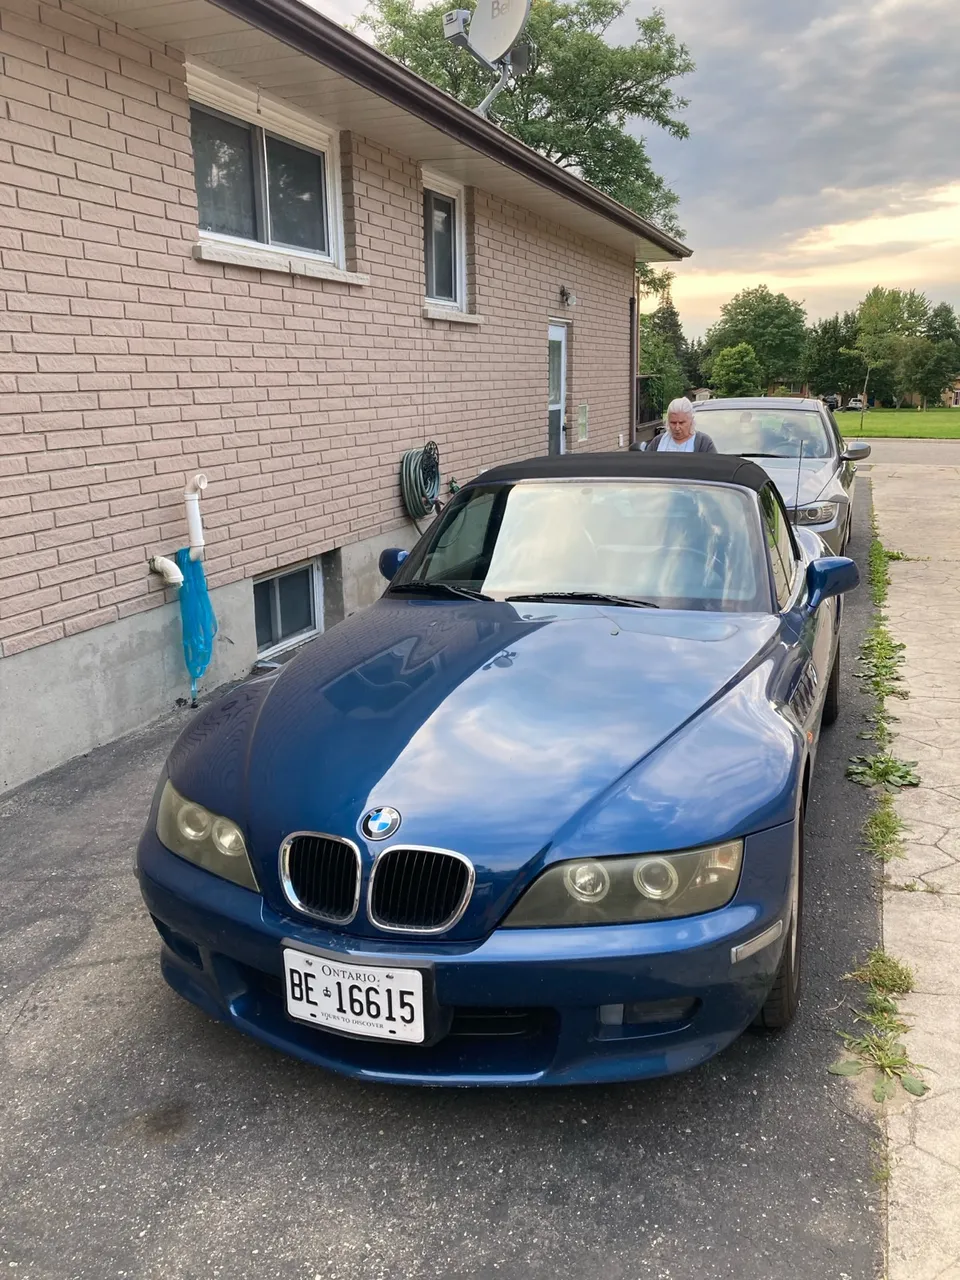 2001 BMW Z3 in beautiful condition